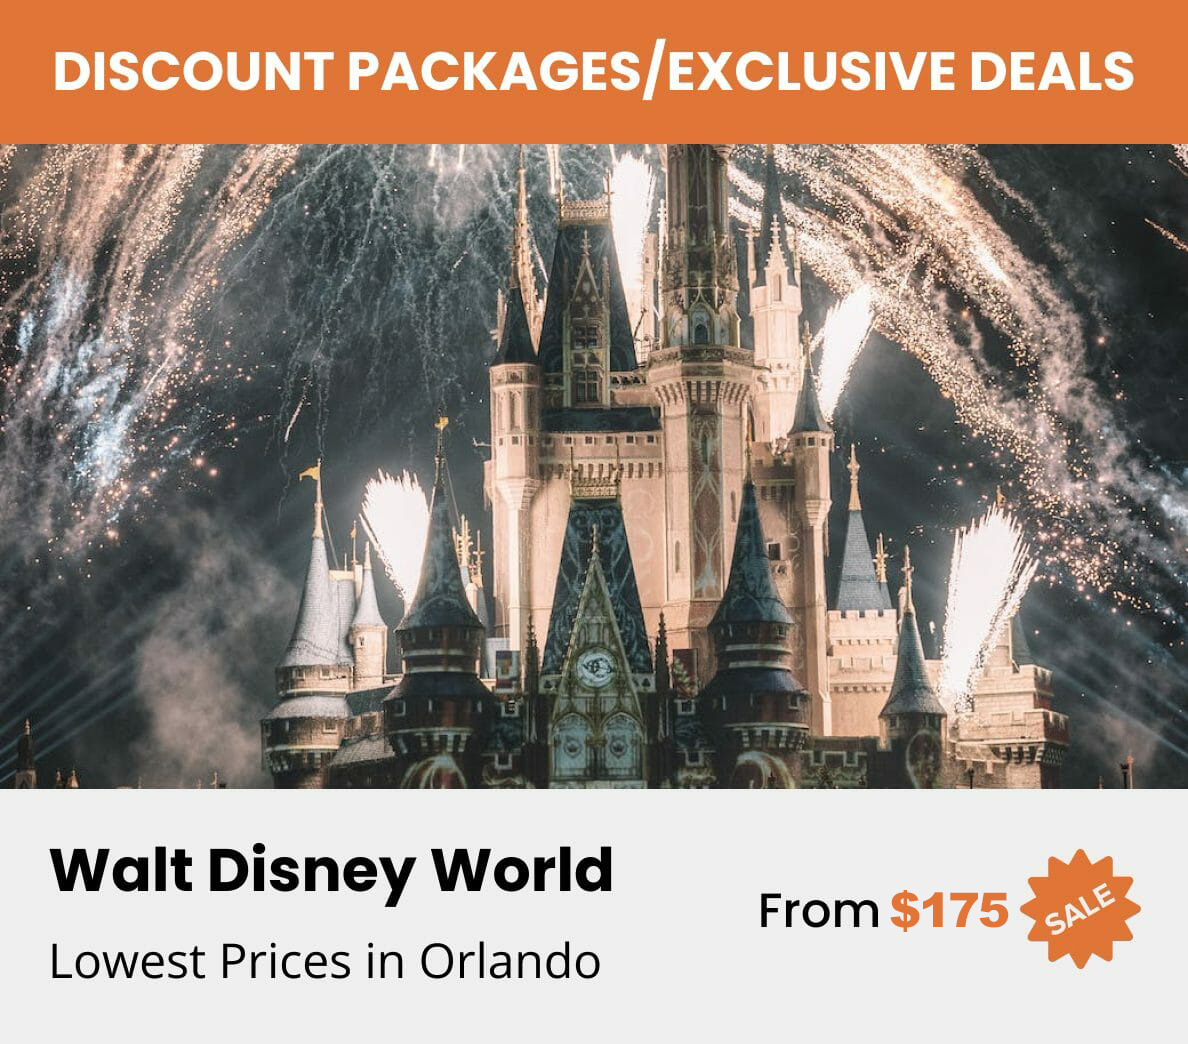 Walt Disney World Discount Package and Exclusive Deals Orlandovacation.com